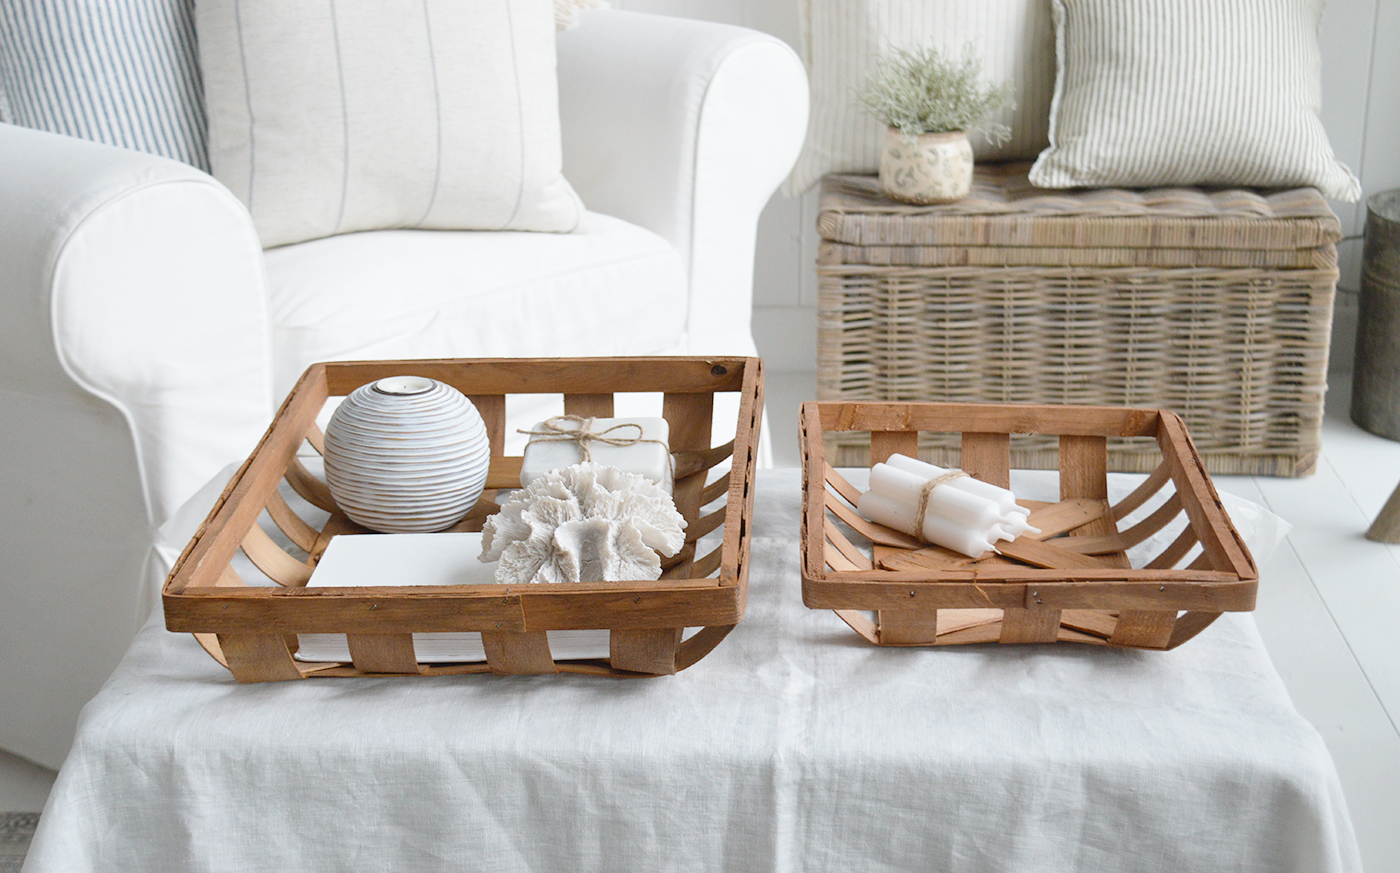 The haverton Trays with faux coral, candles and white home decor accessories